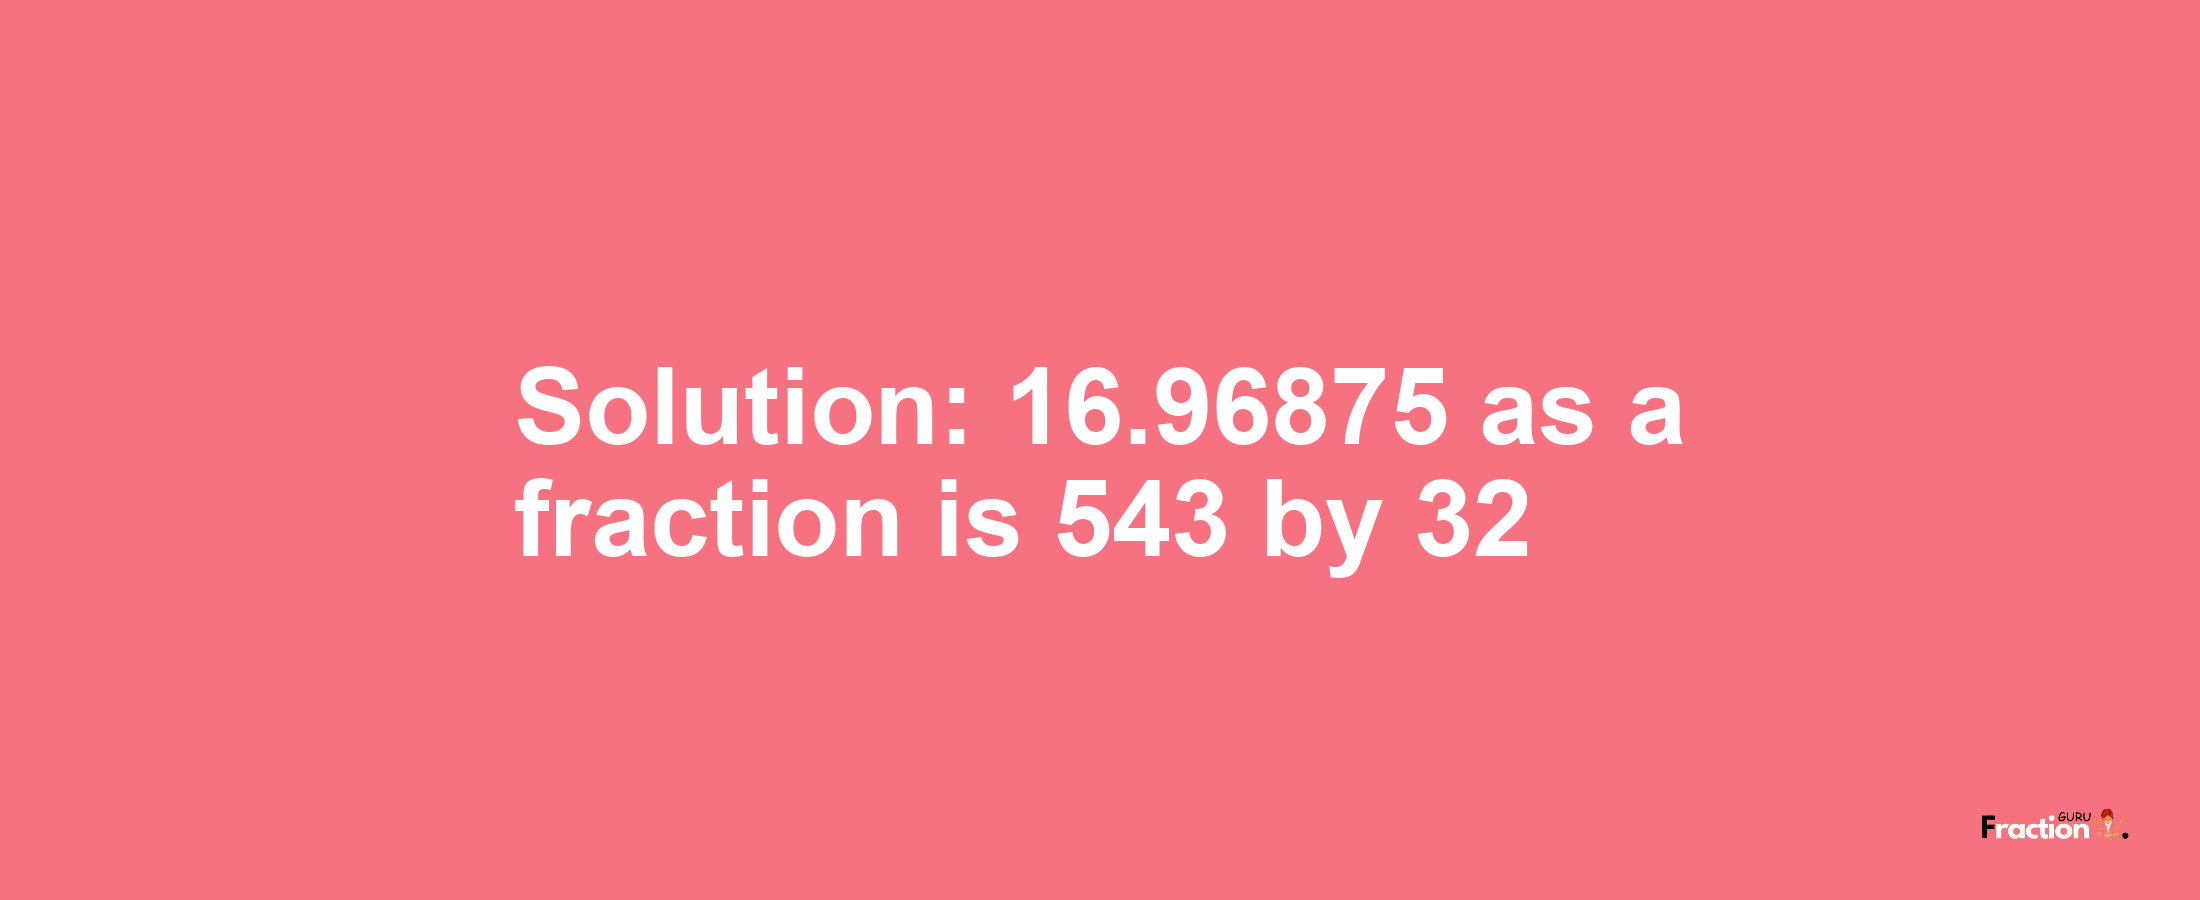 Solution:16.96875 as a fraction is 543/32